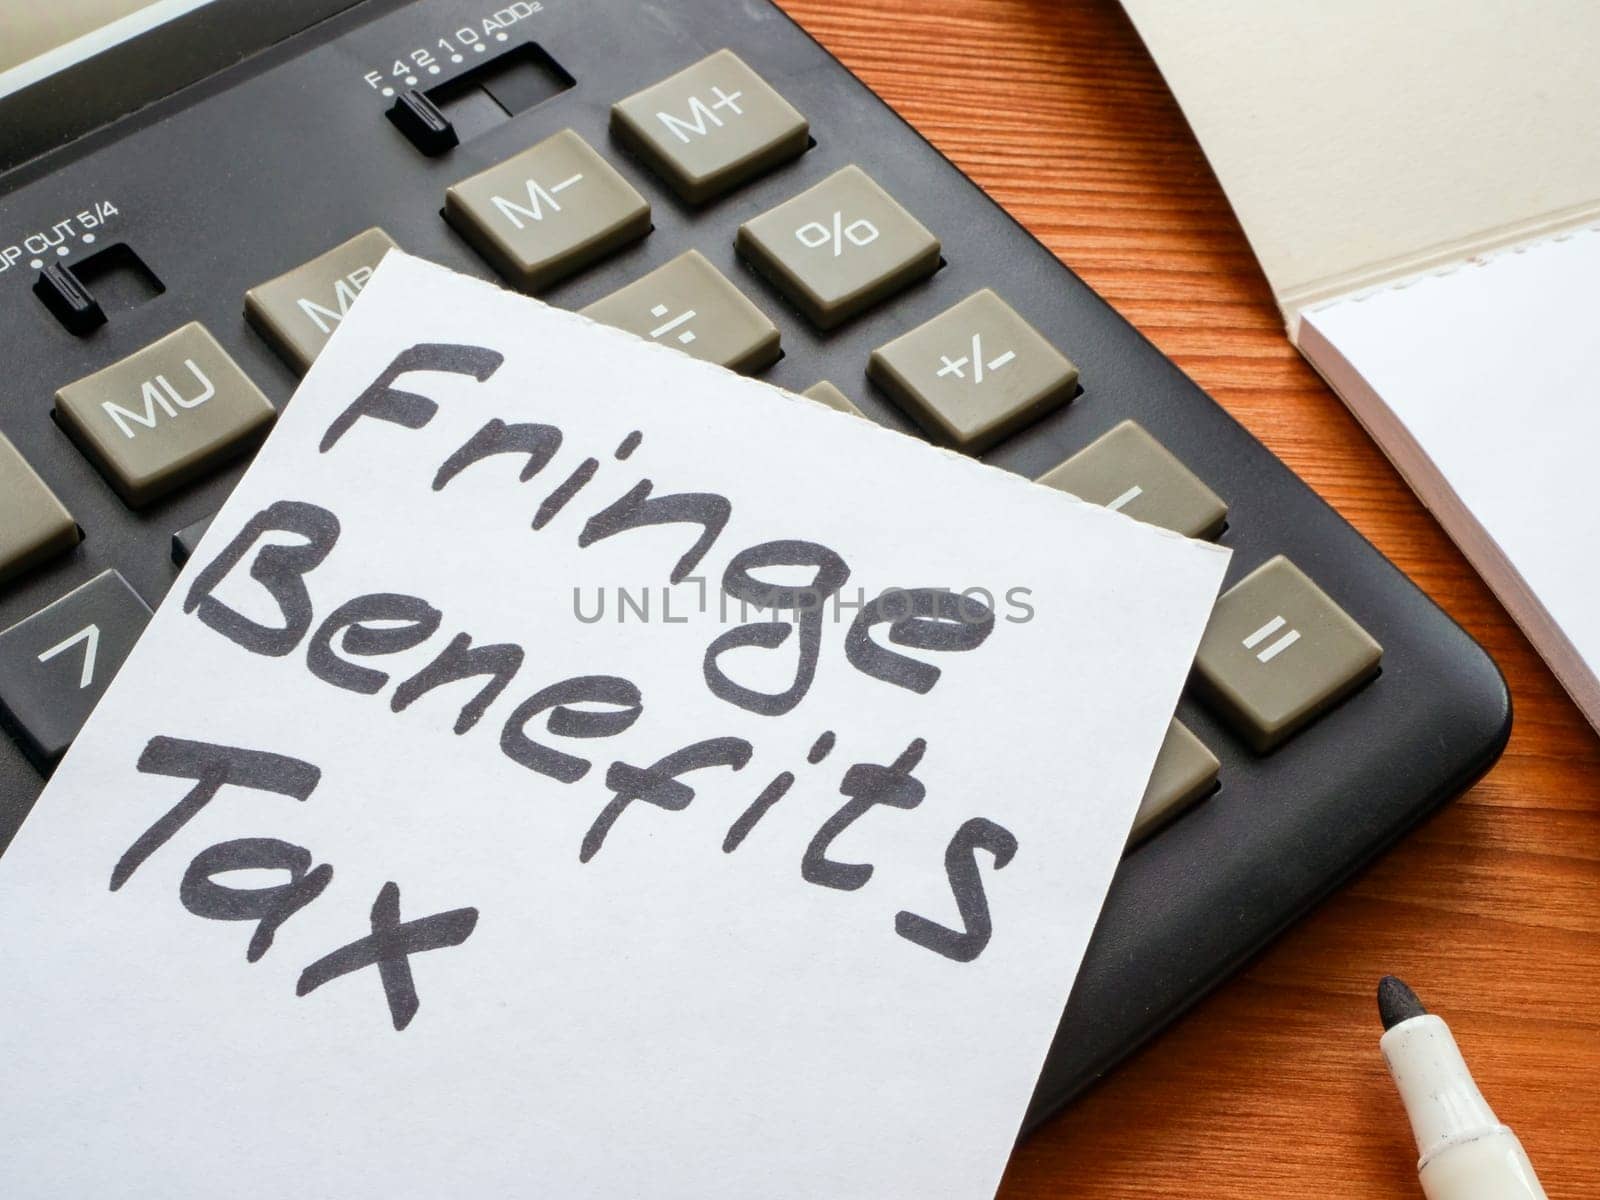 Fringe benefits tax on the calculator. by designer491